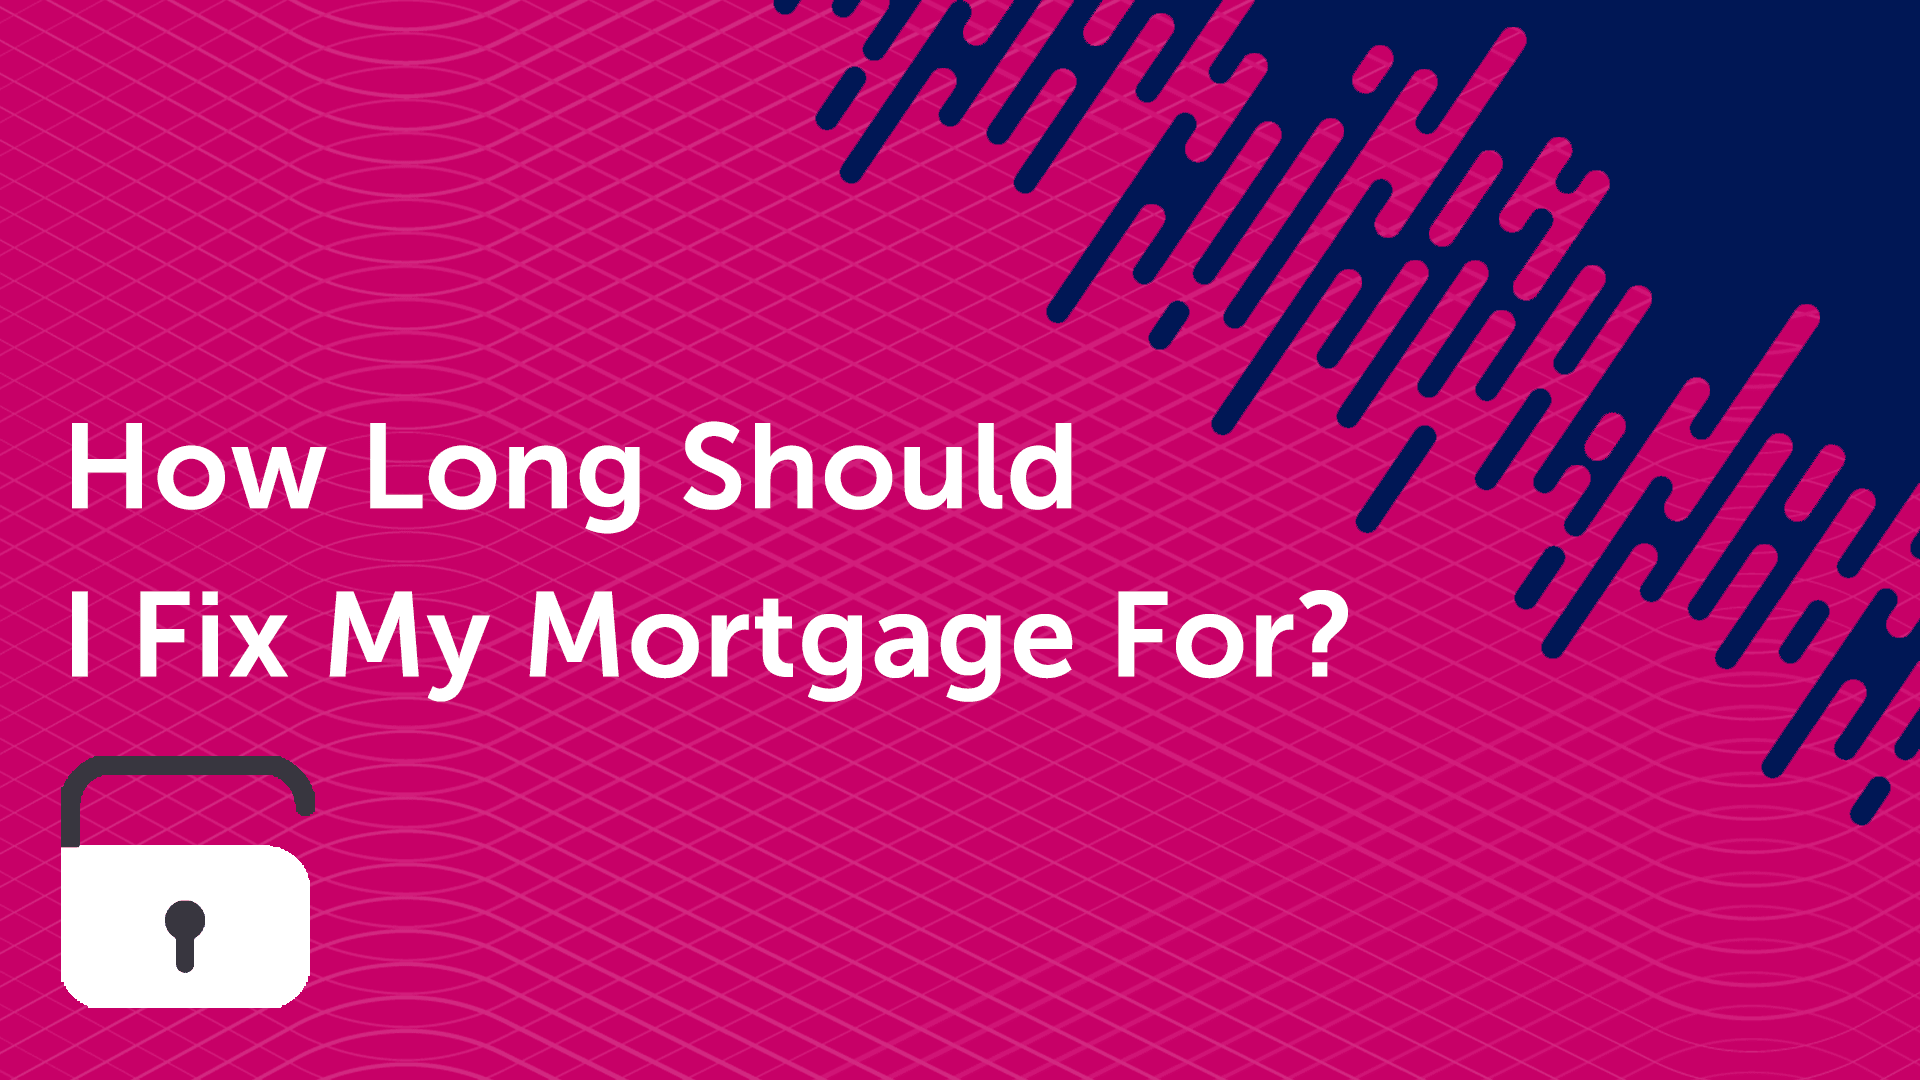 How Long Should I Fix my Mortgage For in Sunderland?